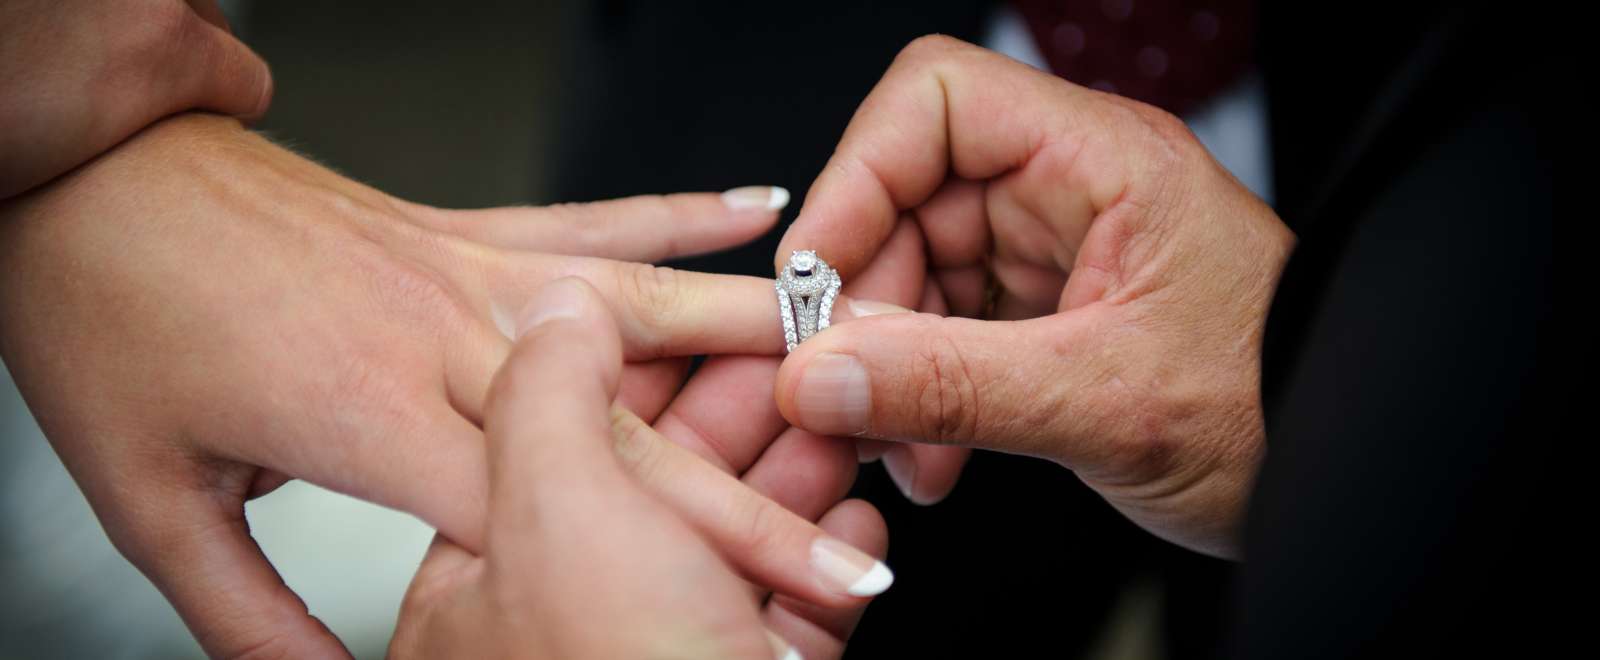 A groom putting a wedding ring on his bride's finger